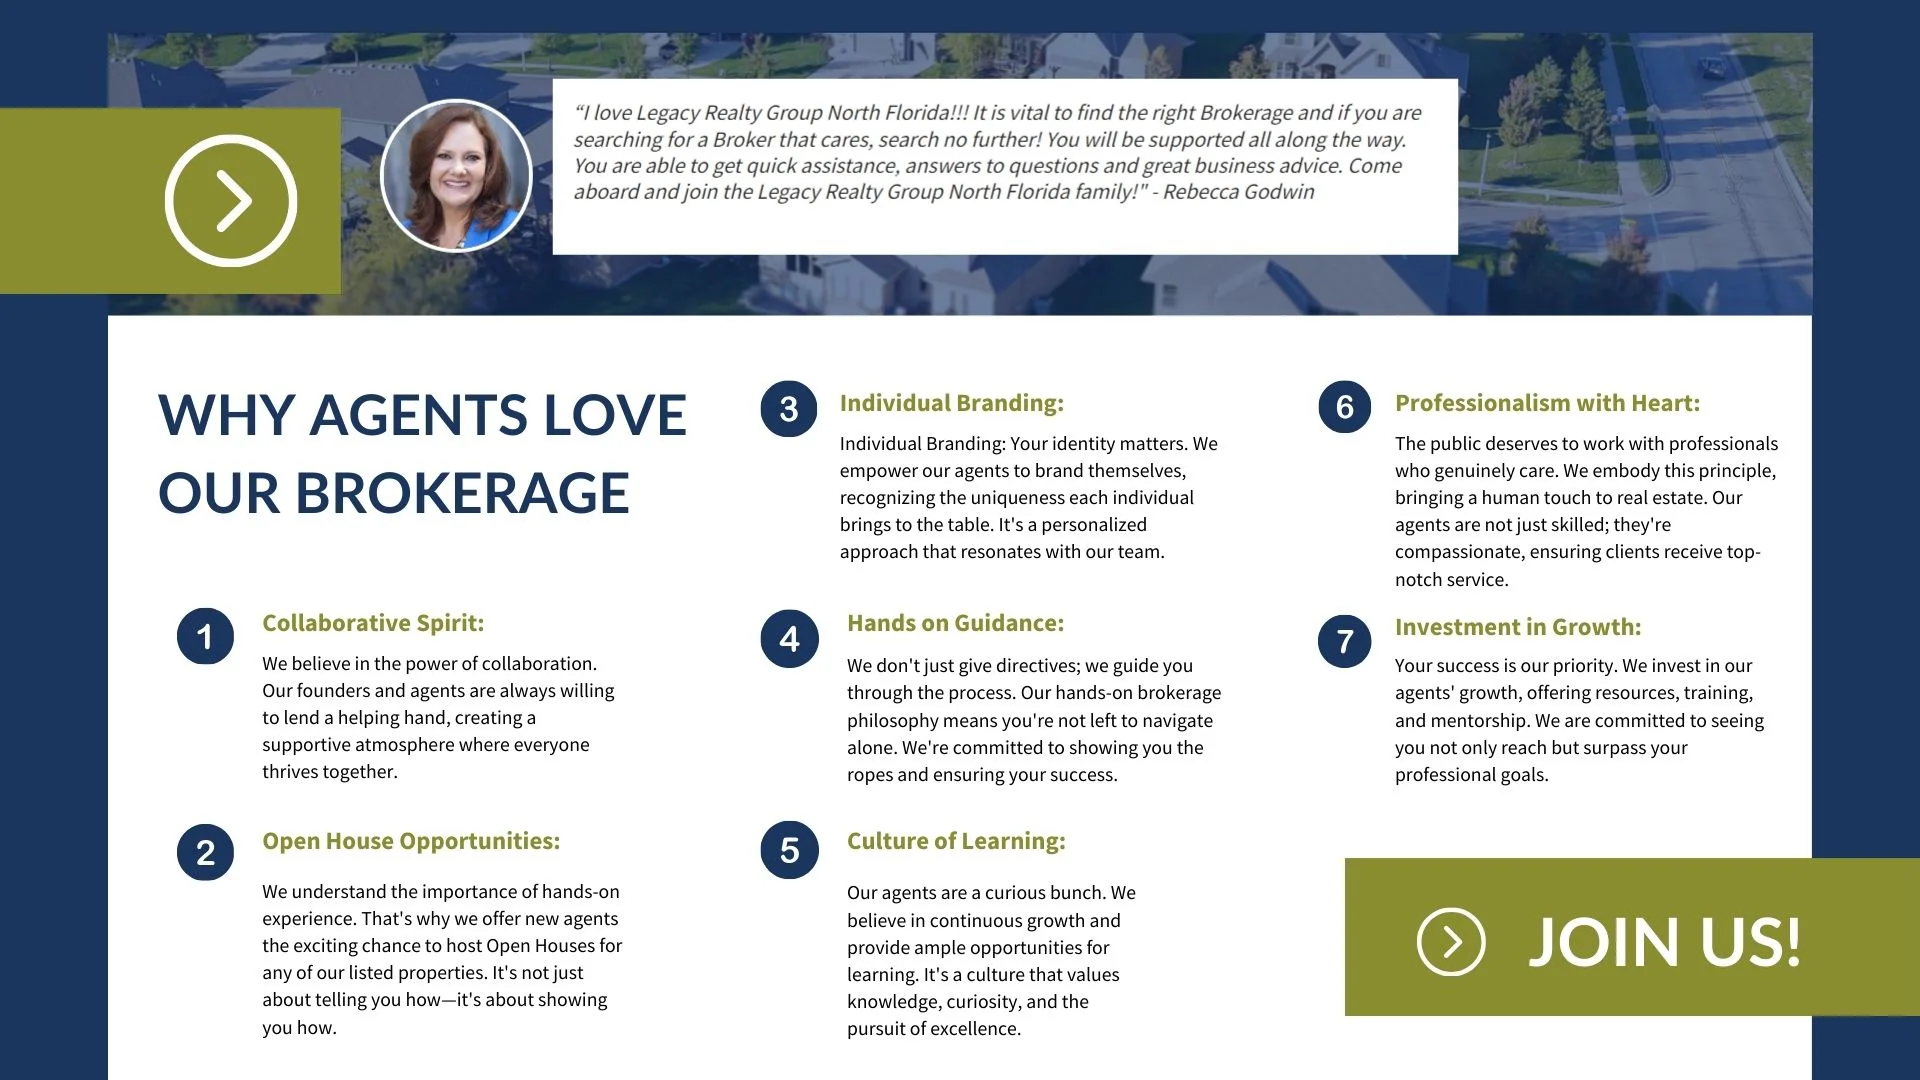 Why agents love our brokerage